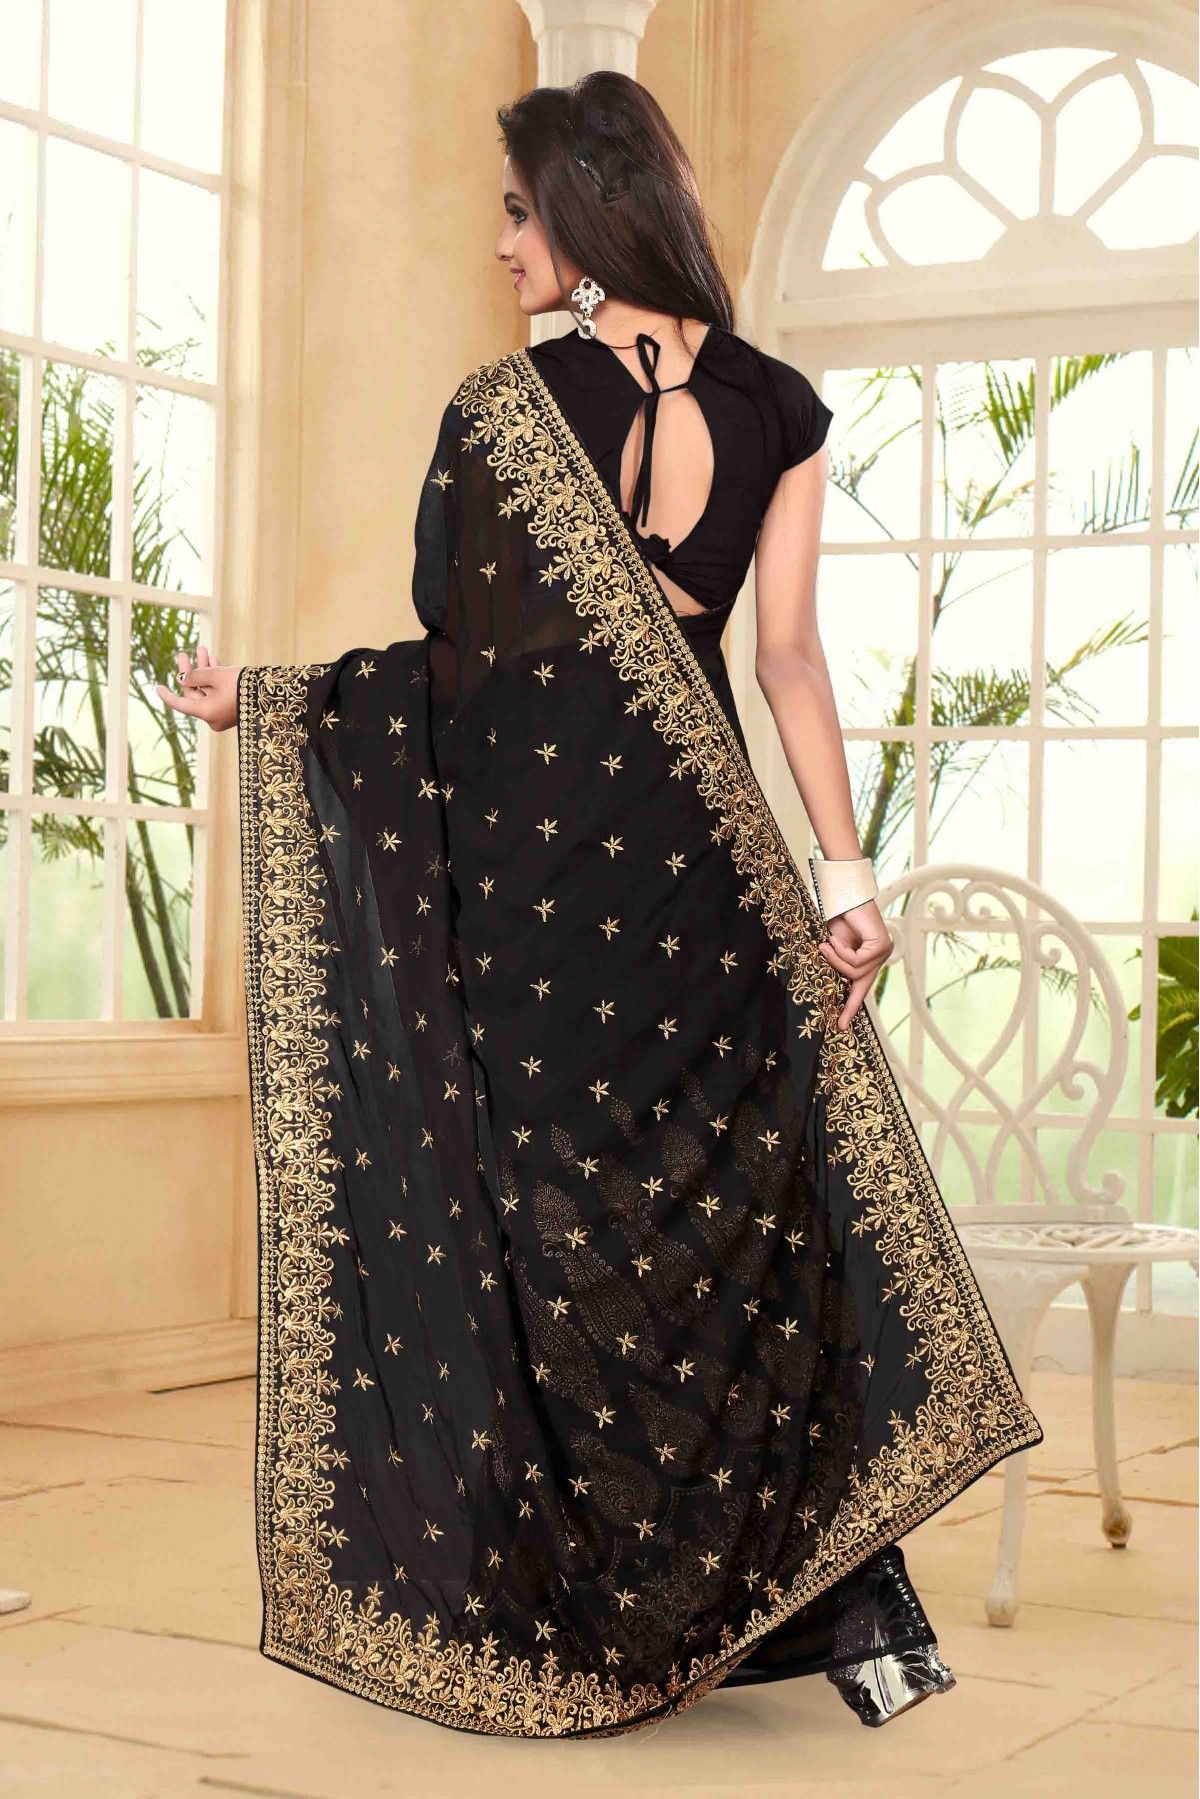 Best Sarees For Women In India Get Latest Saree Collection To Drape In Style